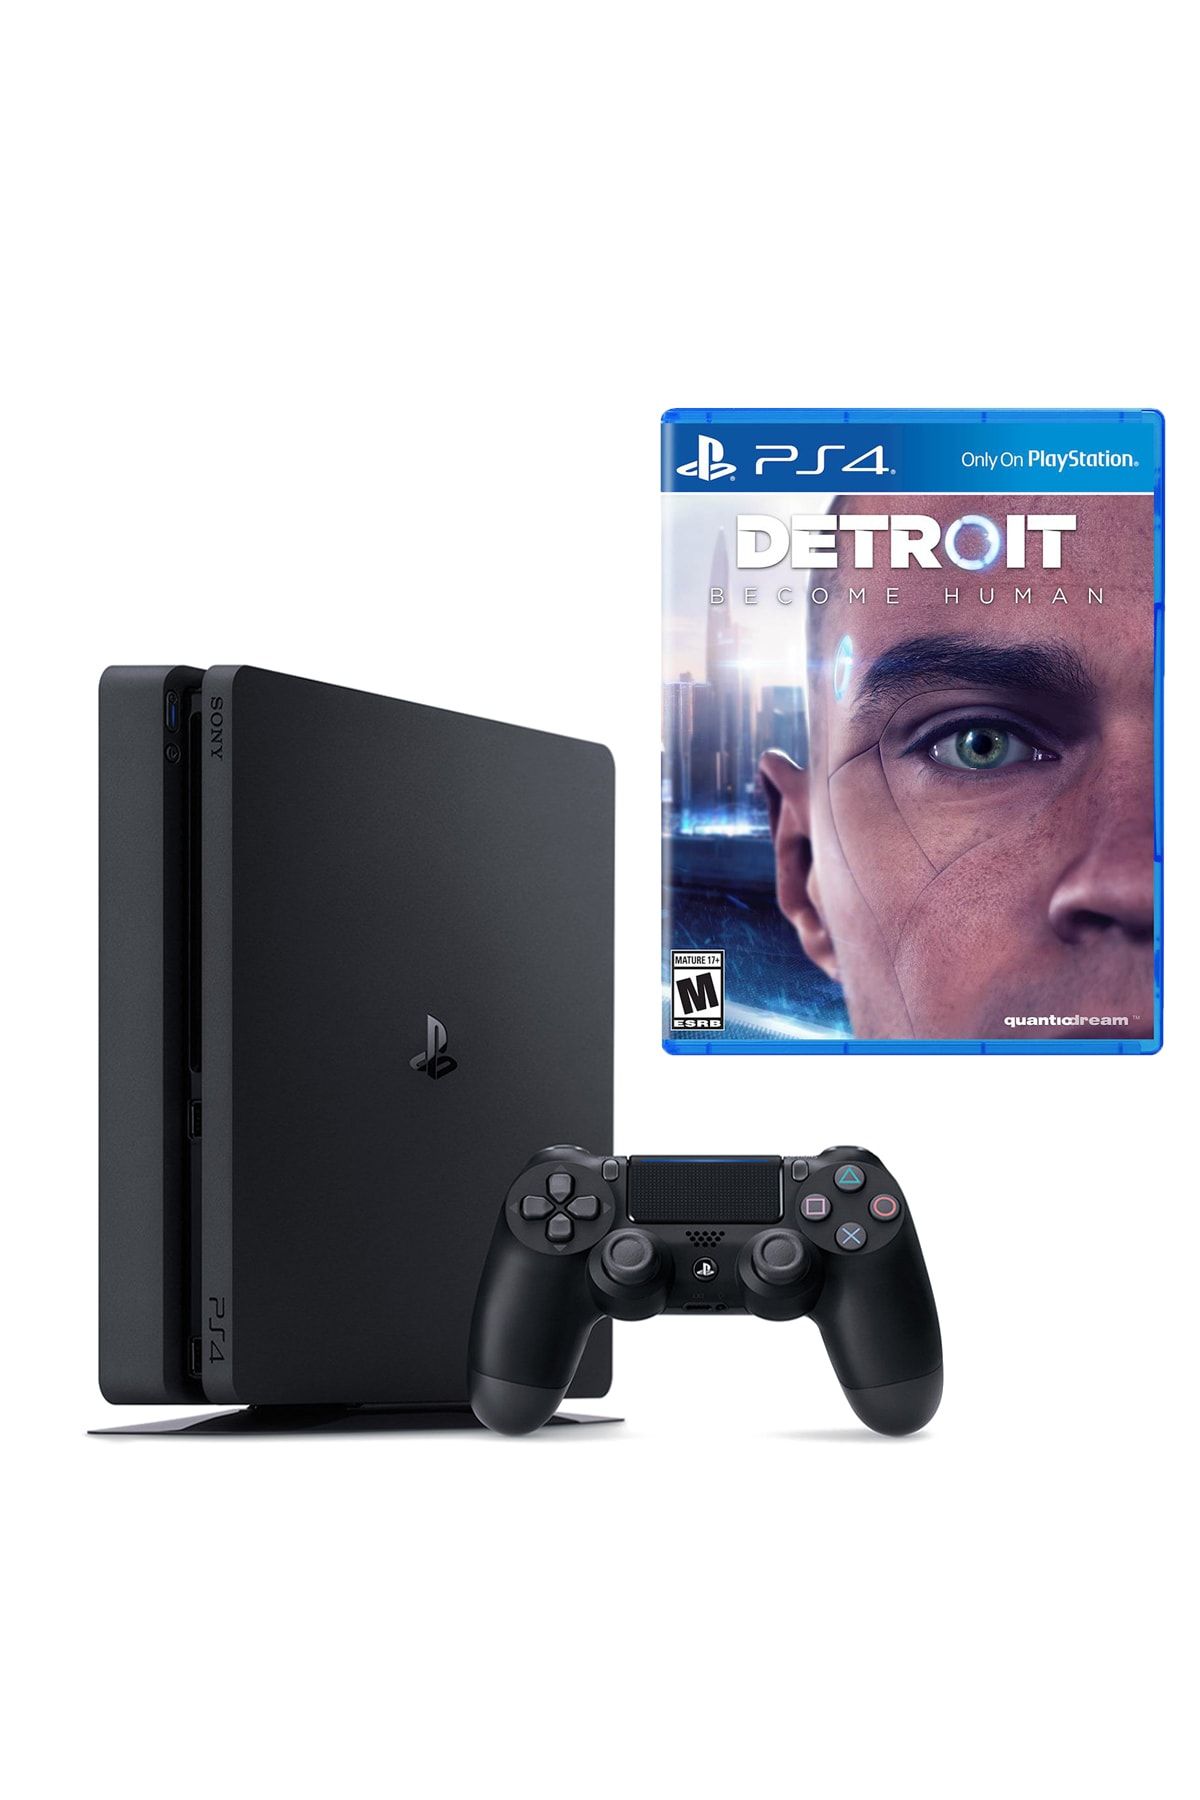 Sony Playstation 4 Slim 1 TB + PS4 Detroit Become Human